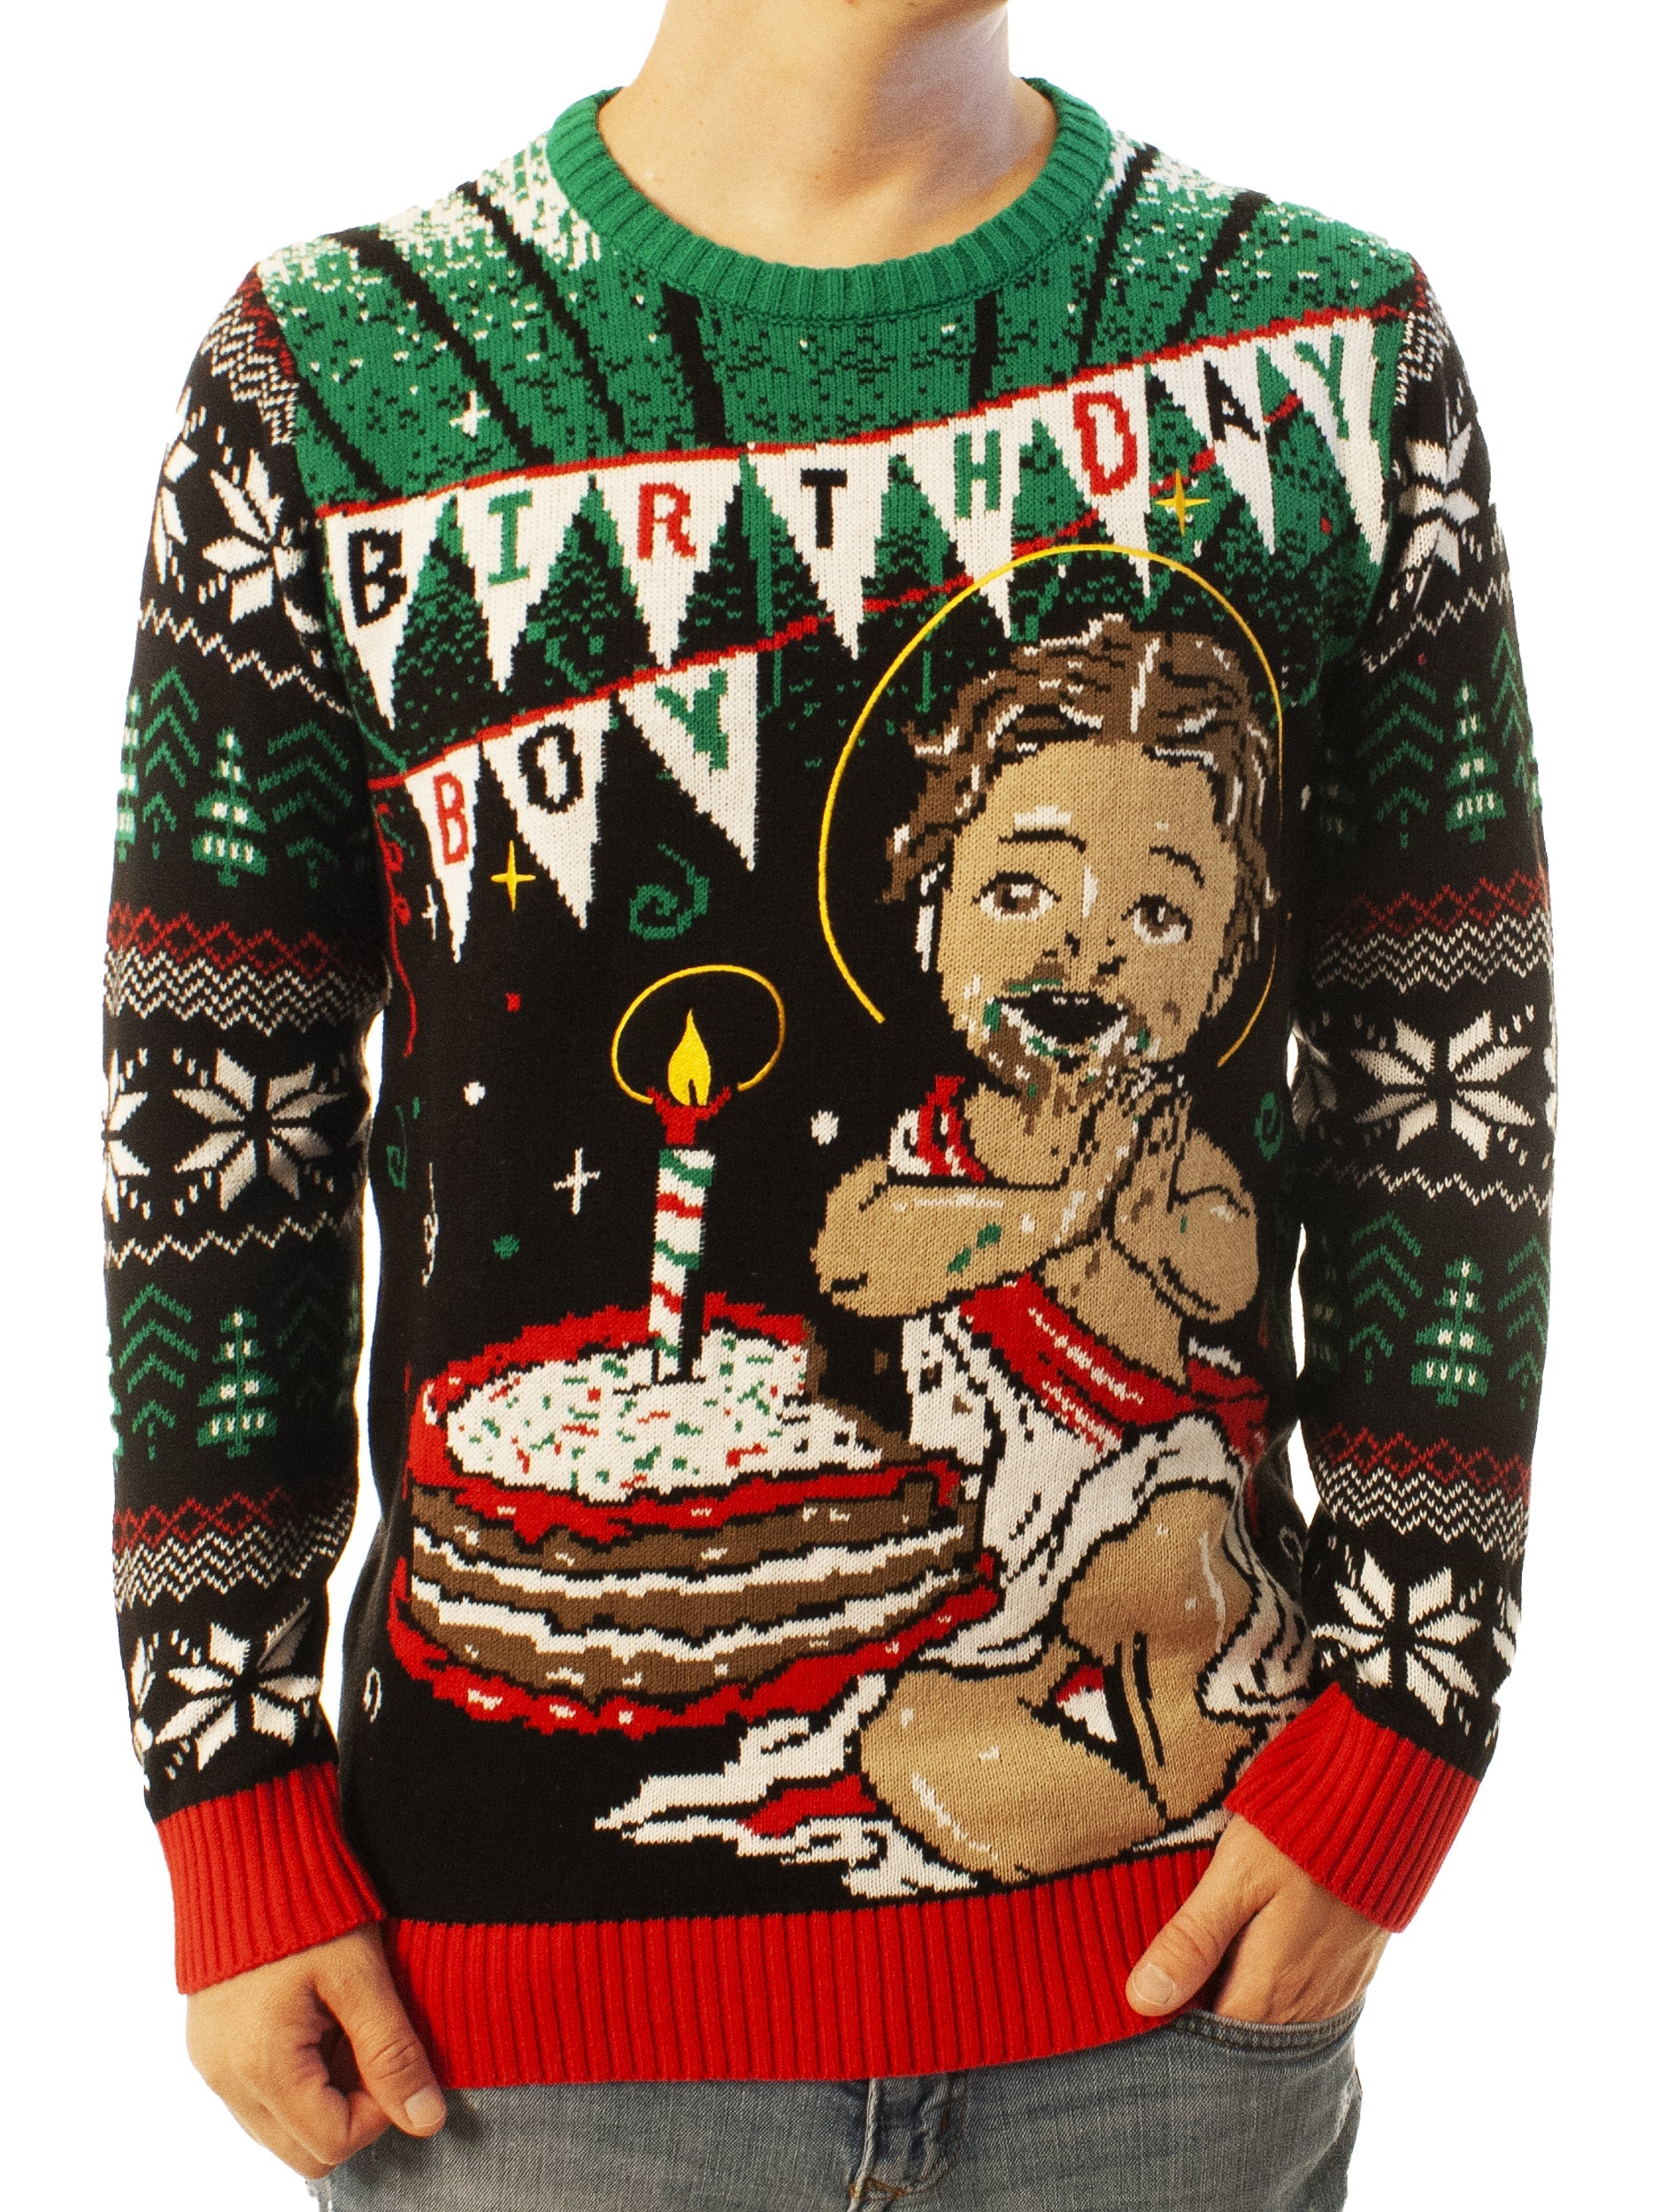 Jesus Birthday Boy Cake Smash Ugly Christmas Sweater - Xmas Gifts For Him Or Her - Jesus Christ Sweater - Christian Shirts Gifts Idea